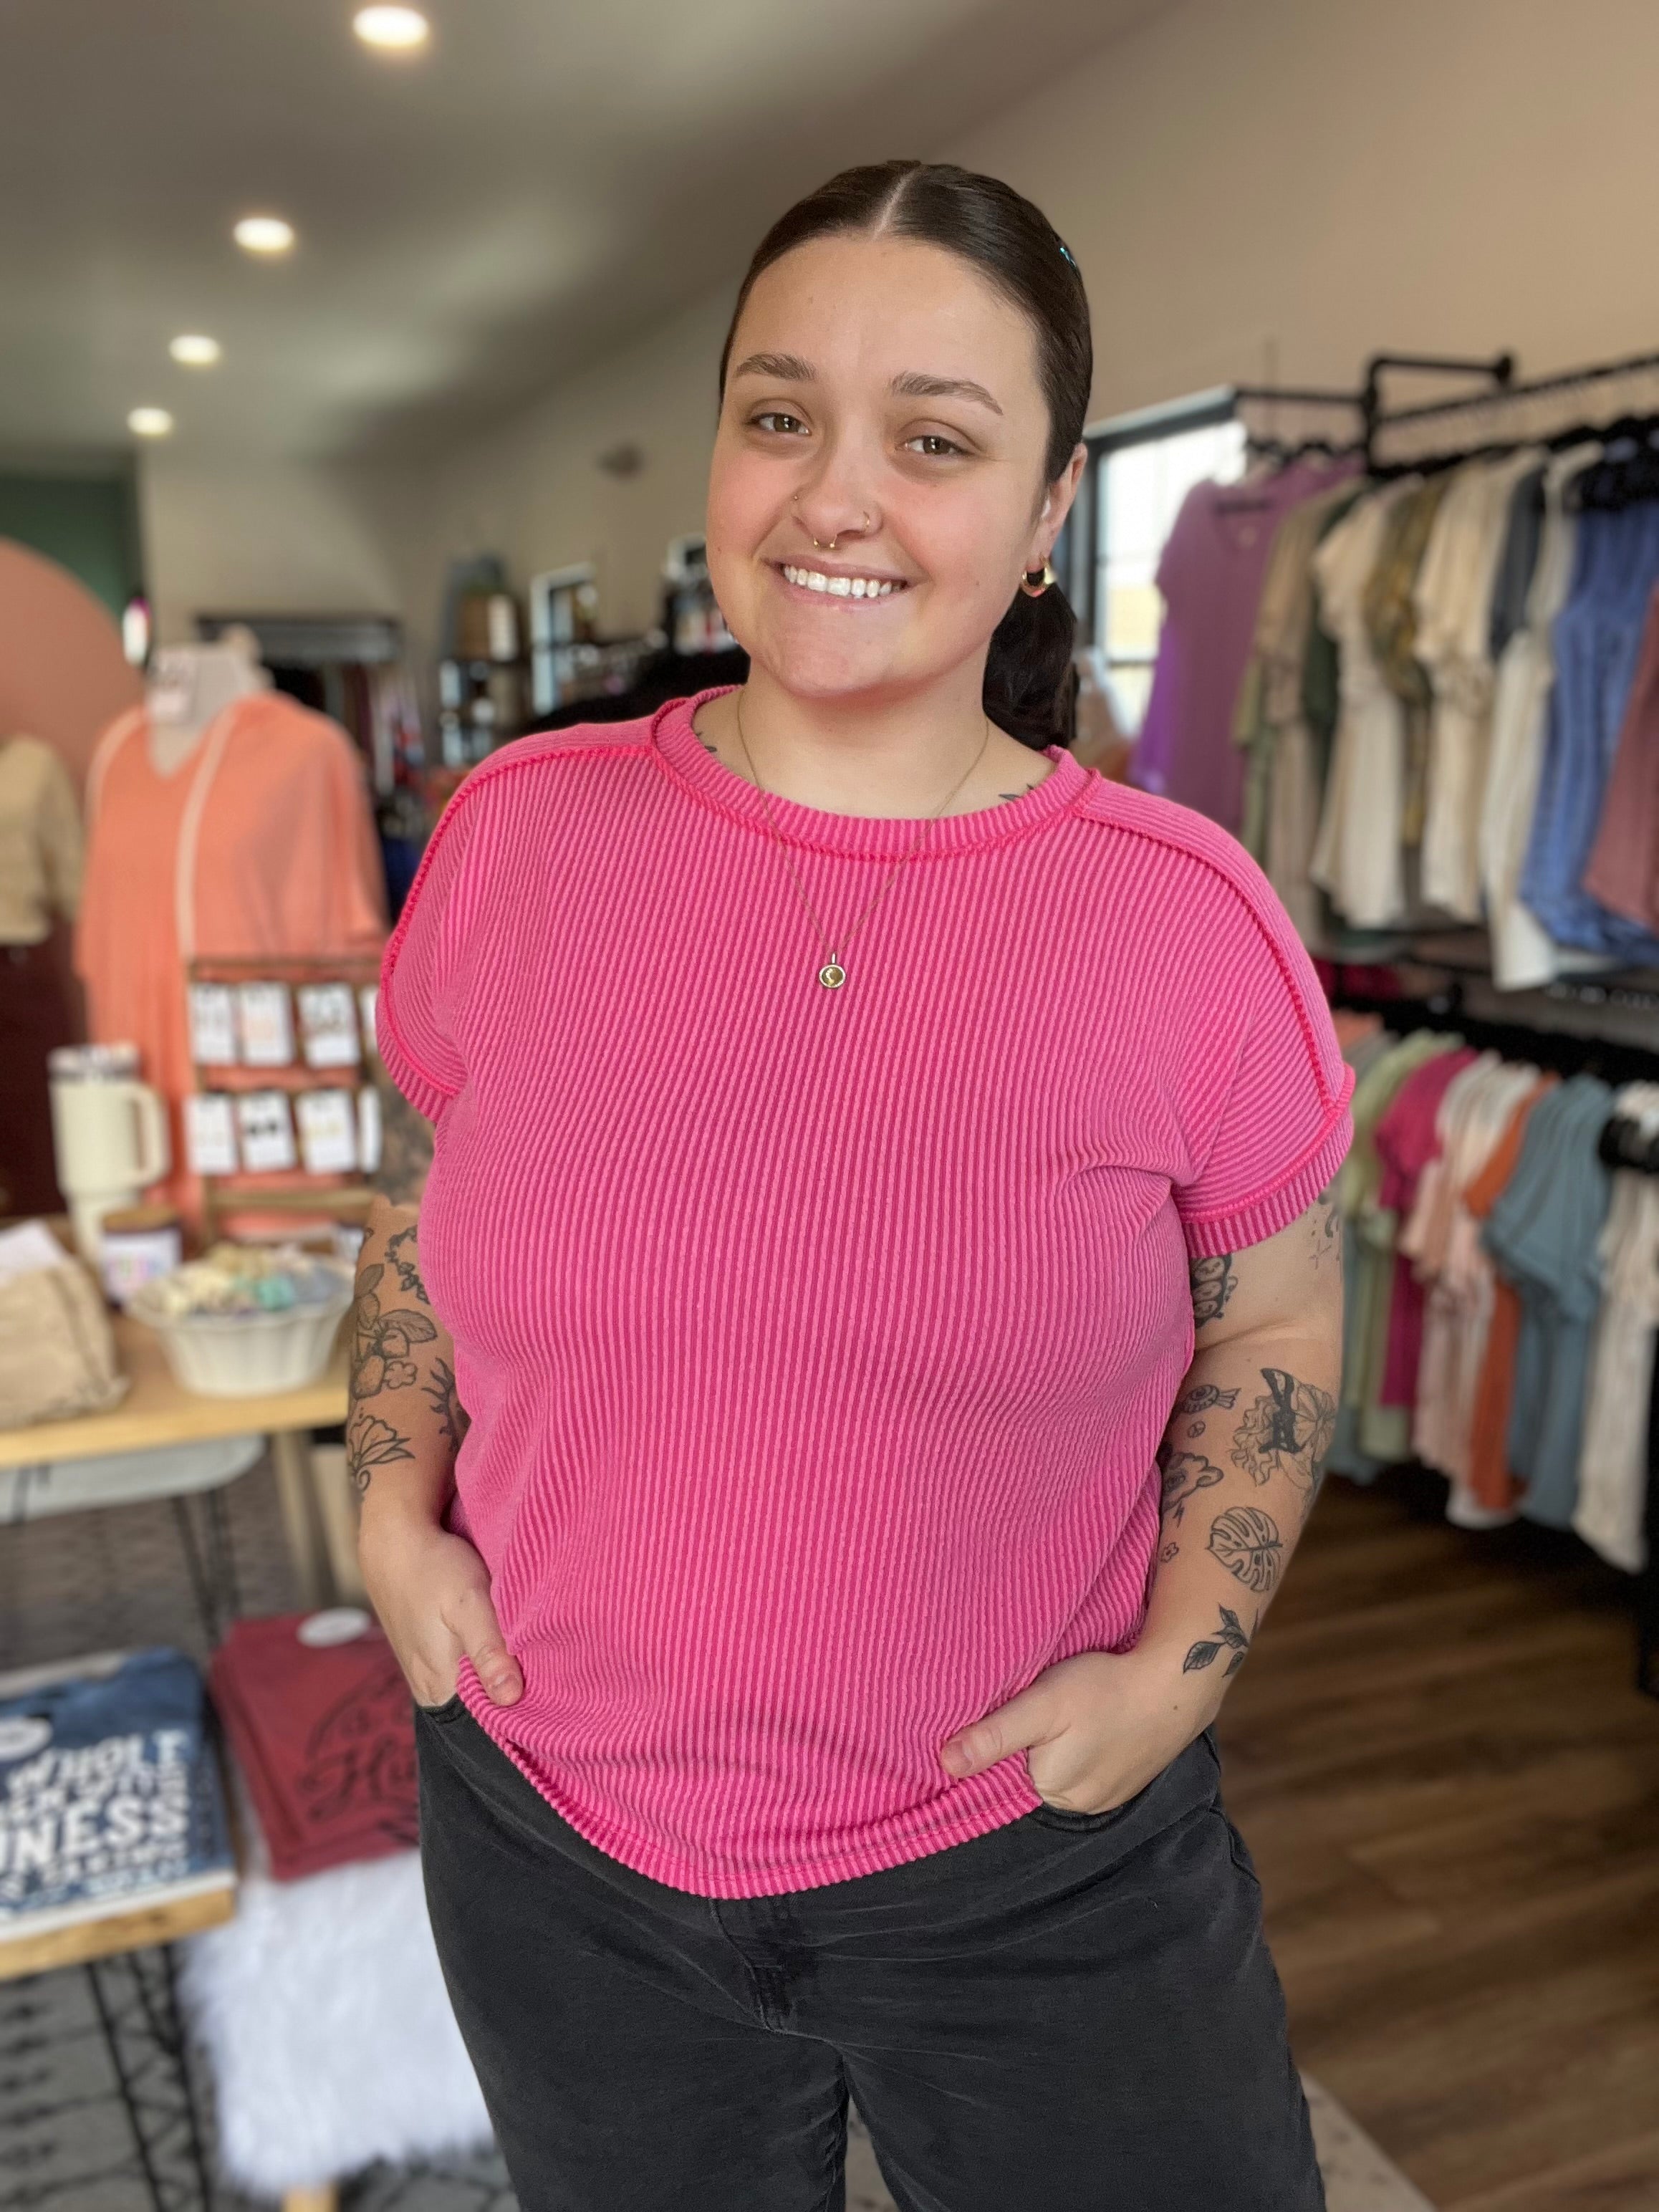 Shop Bright Pink Ribbed Tee-Shirts & Tops at Ruby Joy Boutique, a Women's Clothing Store in Pickerington, Ohio